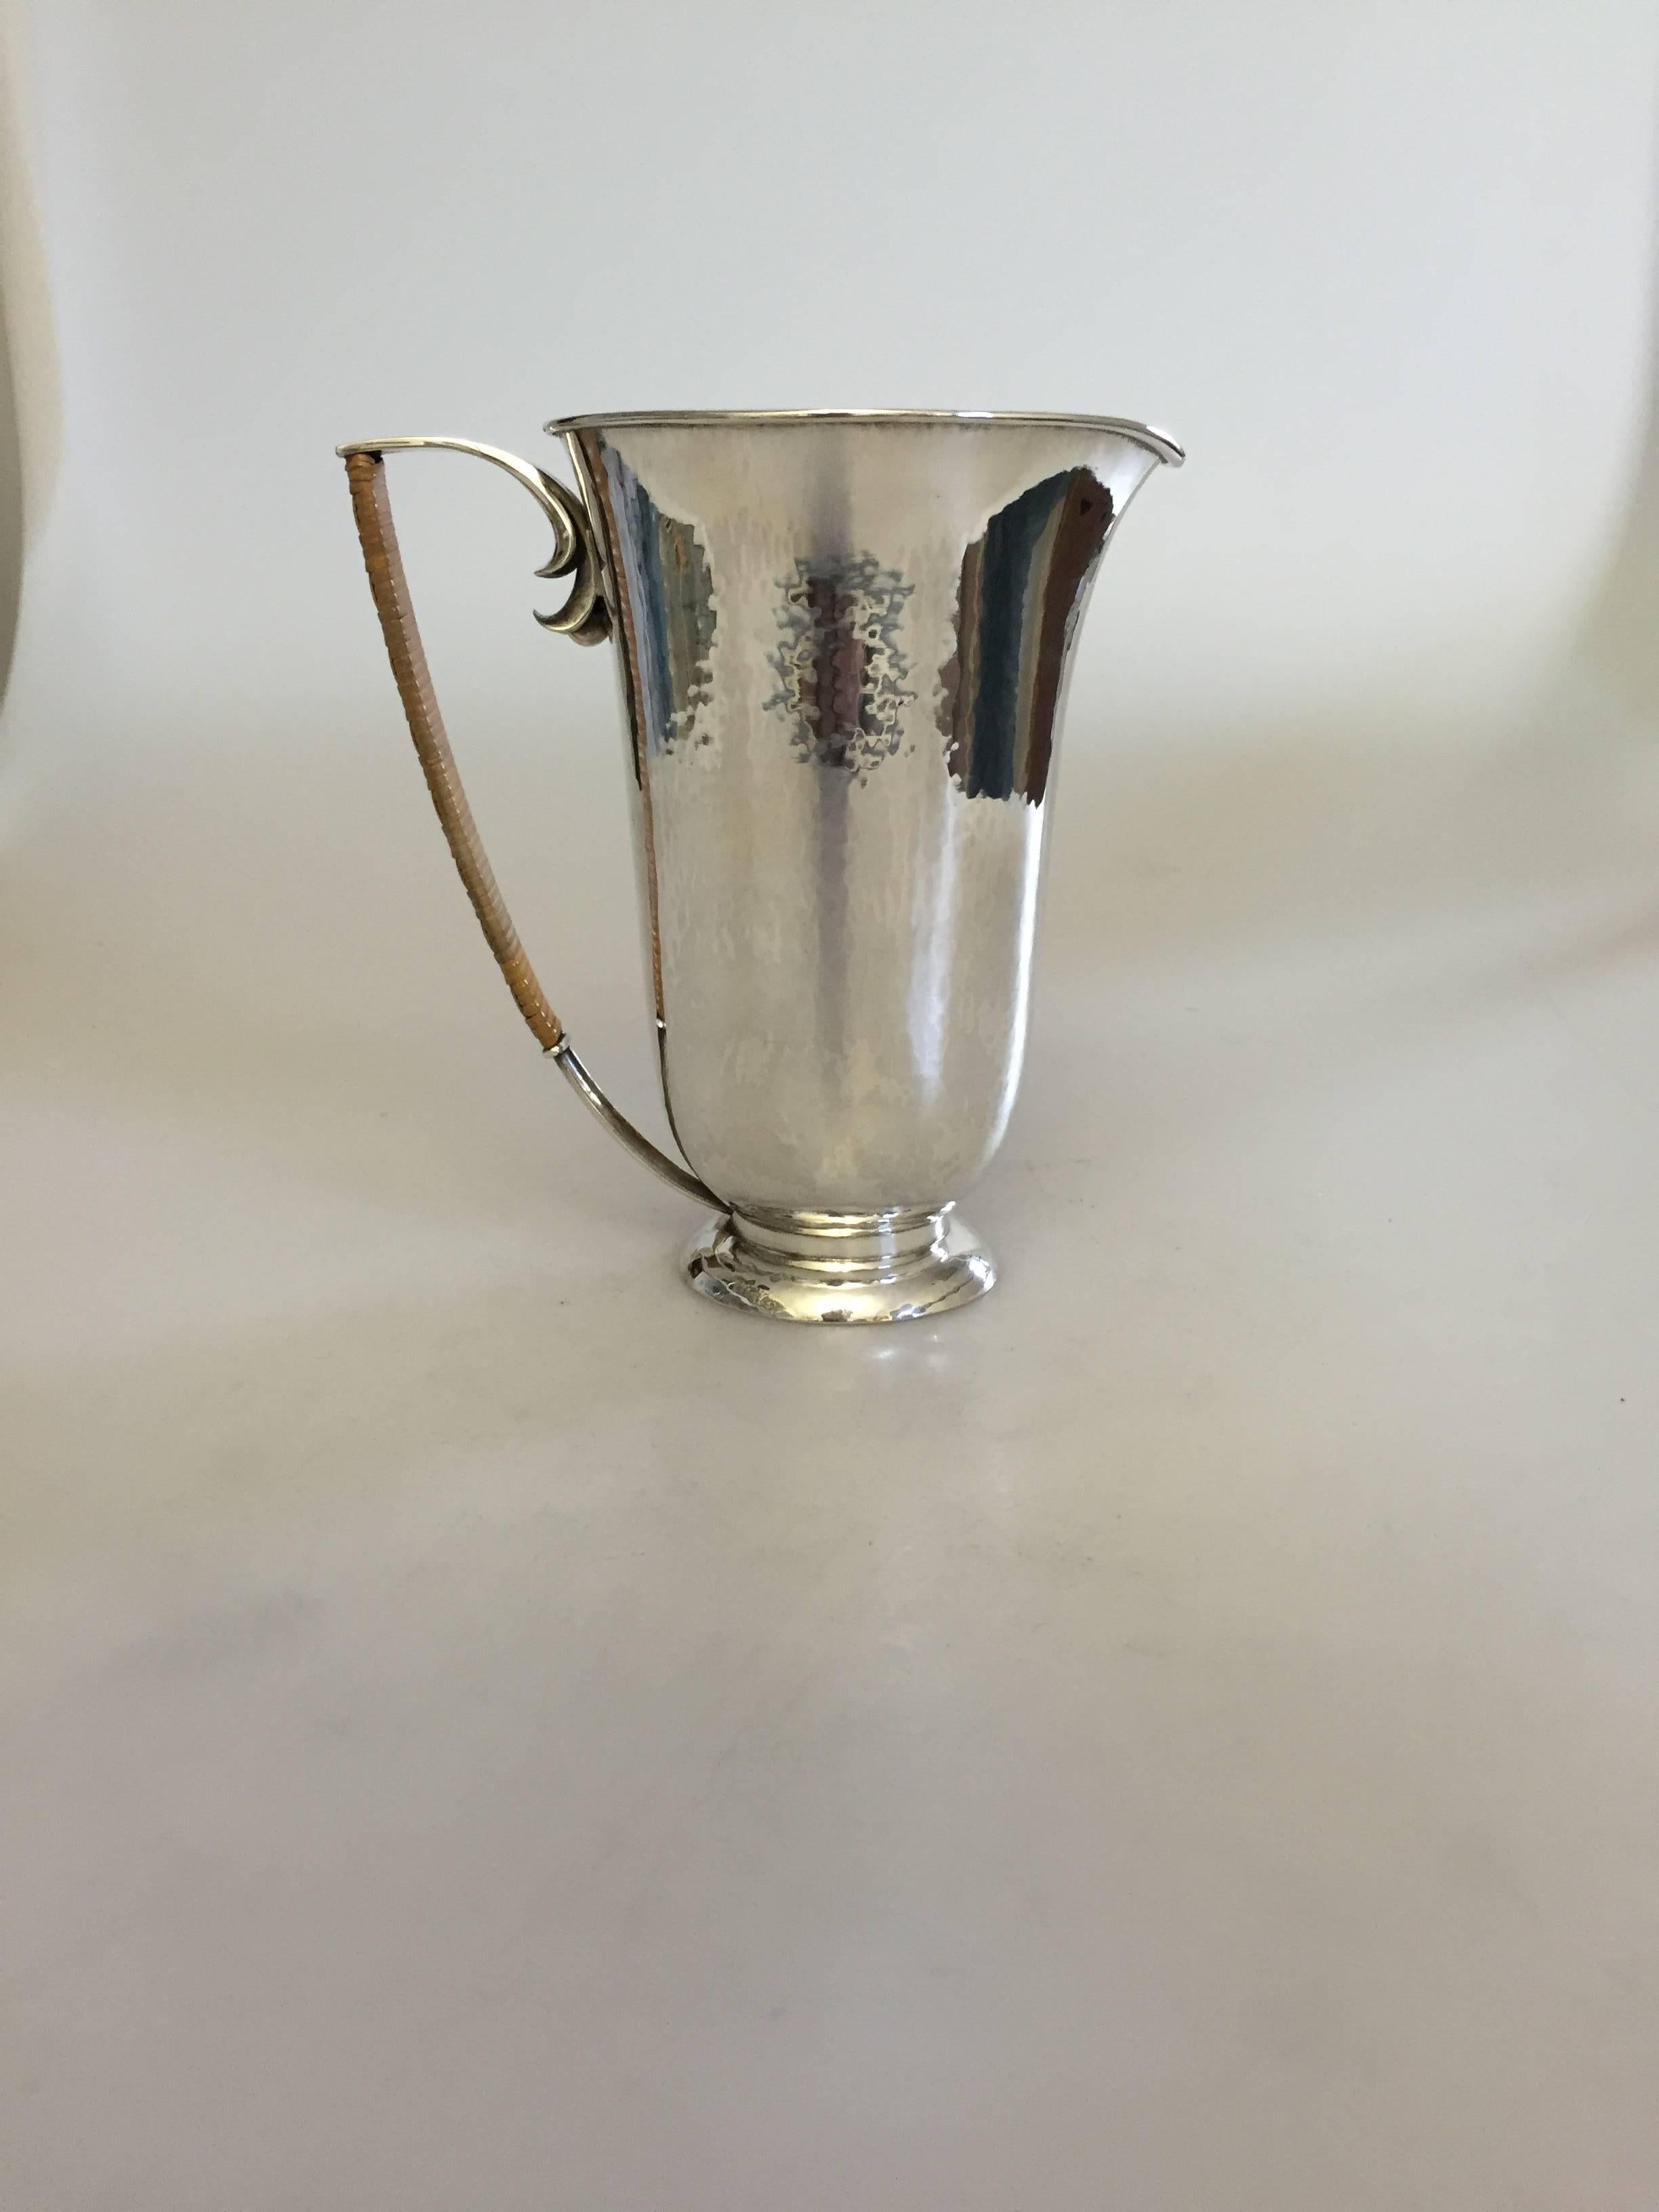 Hans Hansen sterling silver pitcher by Karl Gustav Hansen from 1933. The pitcher measures 15 cm high and is in a good condition.

Hans Hansen (1884-1940) was a Danish silversmithy. He opened his own smithy and shop in Kolding, Denmark in 1906.